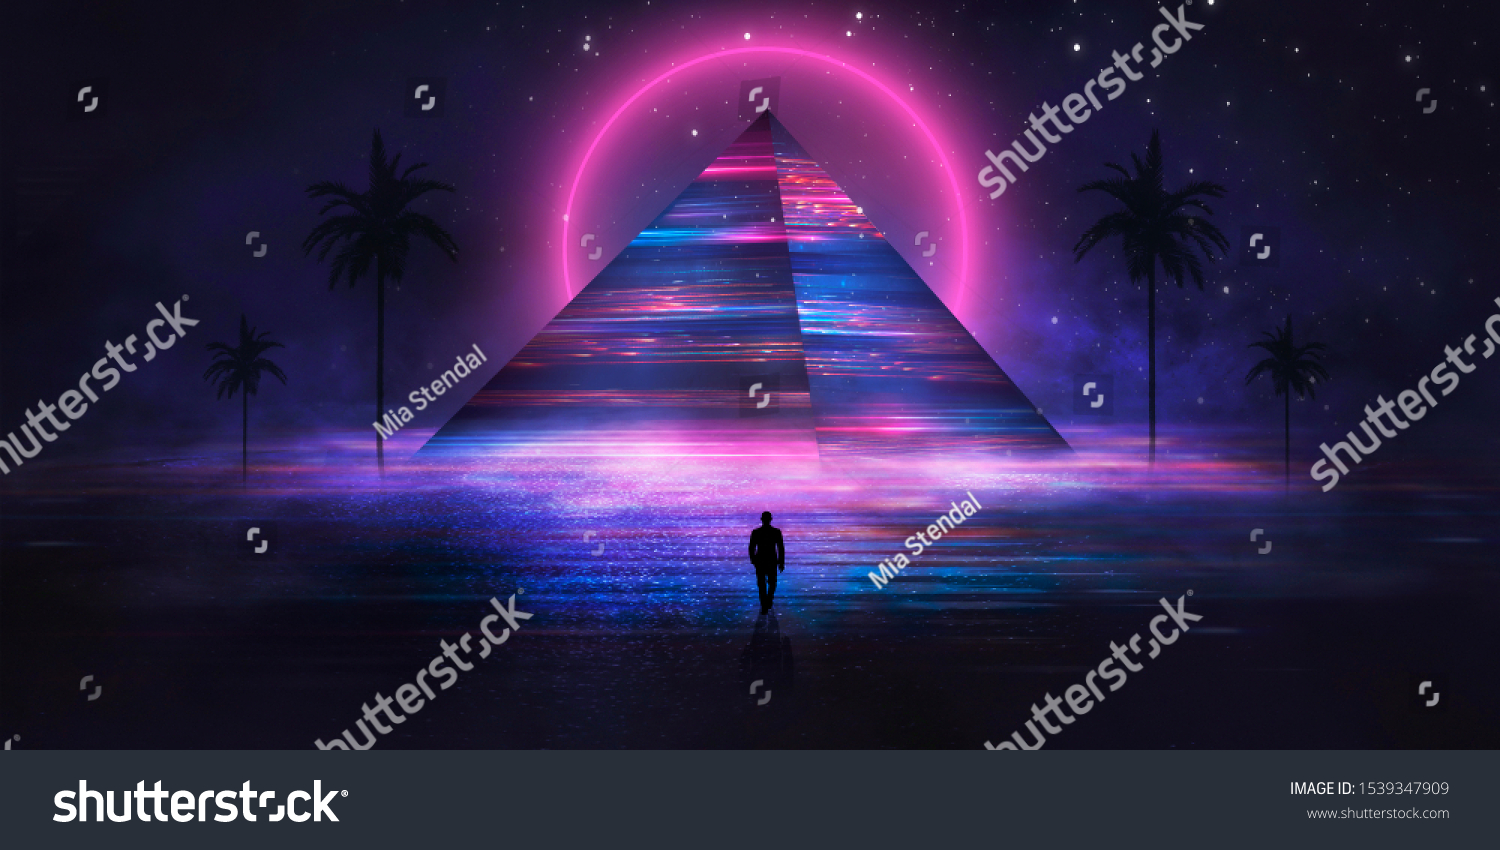 Futuristic abstract night neon background. Light pyramid in the center. Night view of the pyramid illumination. Neon lights reflected on wet asphalt.
 #1539347909